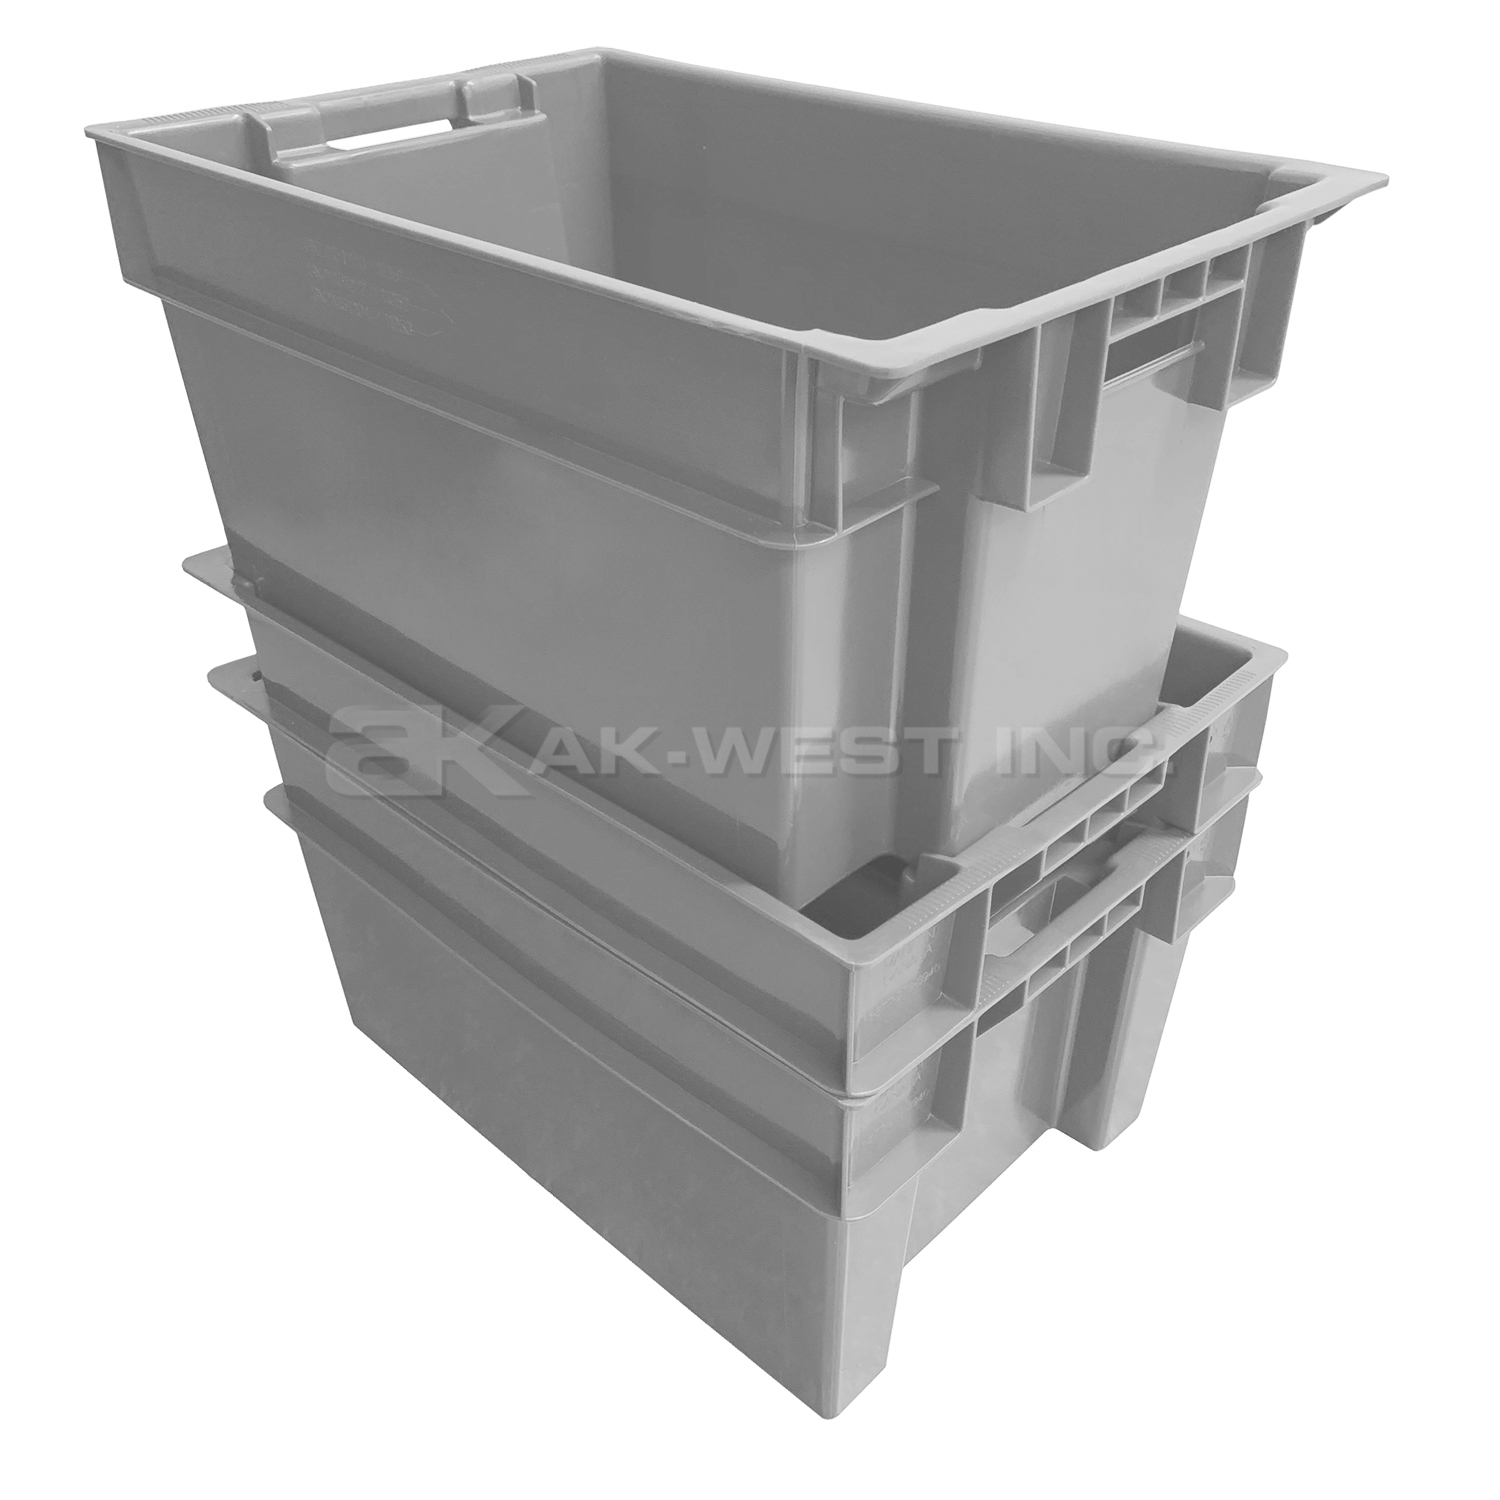 Grey, 24" x 16" x 12", Solid Stack and Nest Container, (Alt. M/N: AC11051)